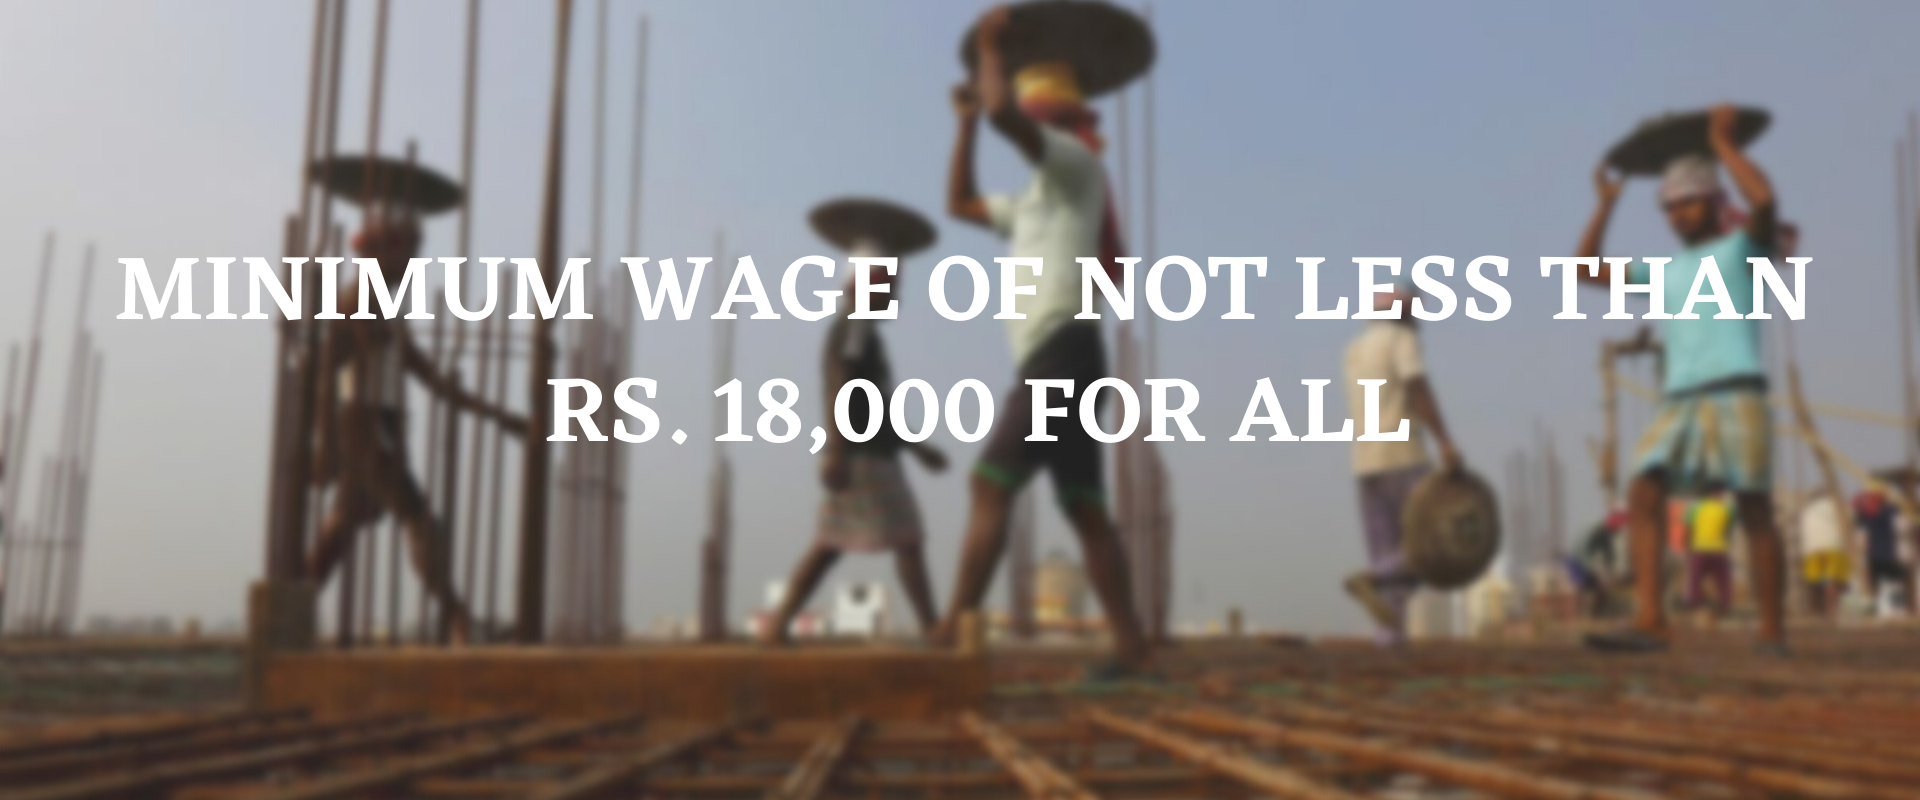 Minimum wage of not less than Rs. 18,000 for all